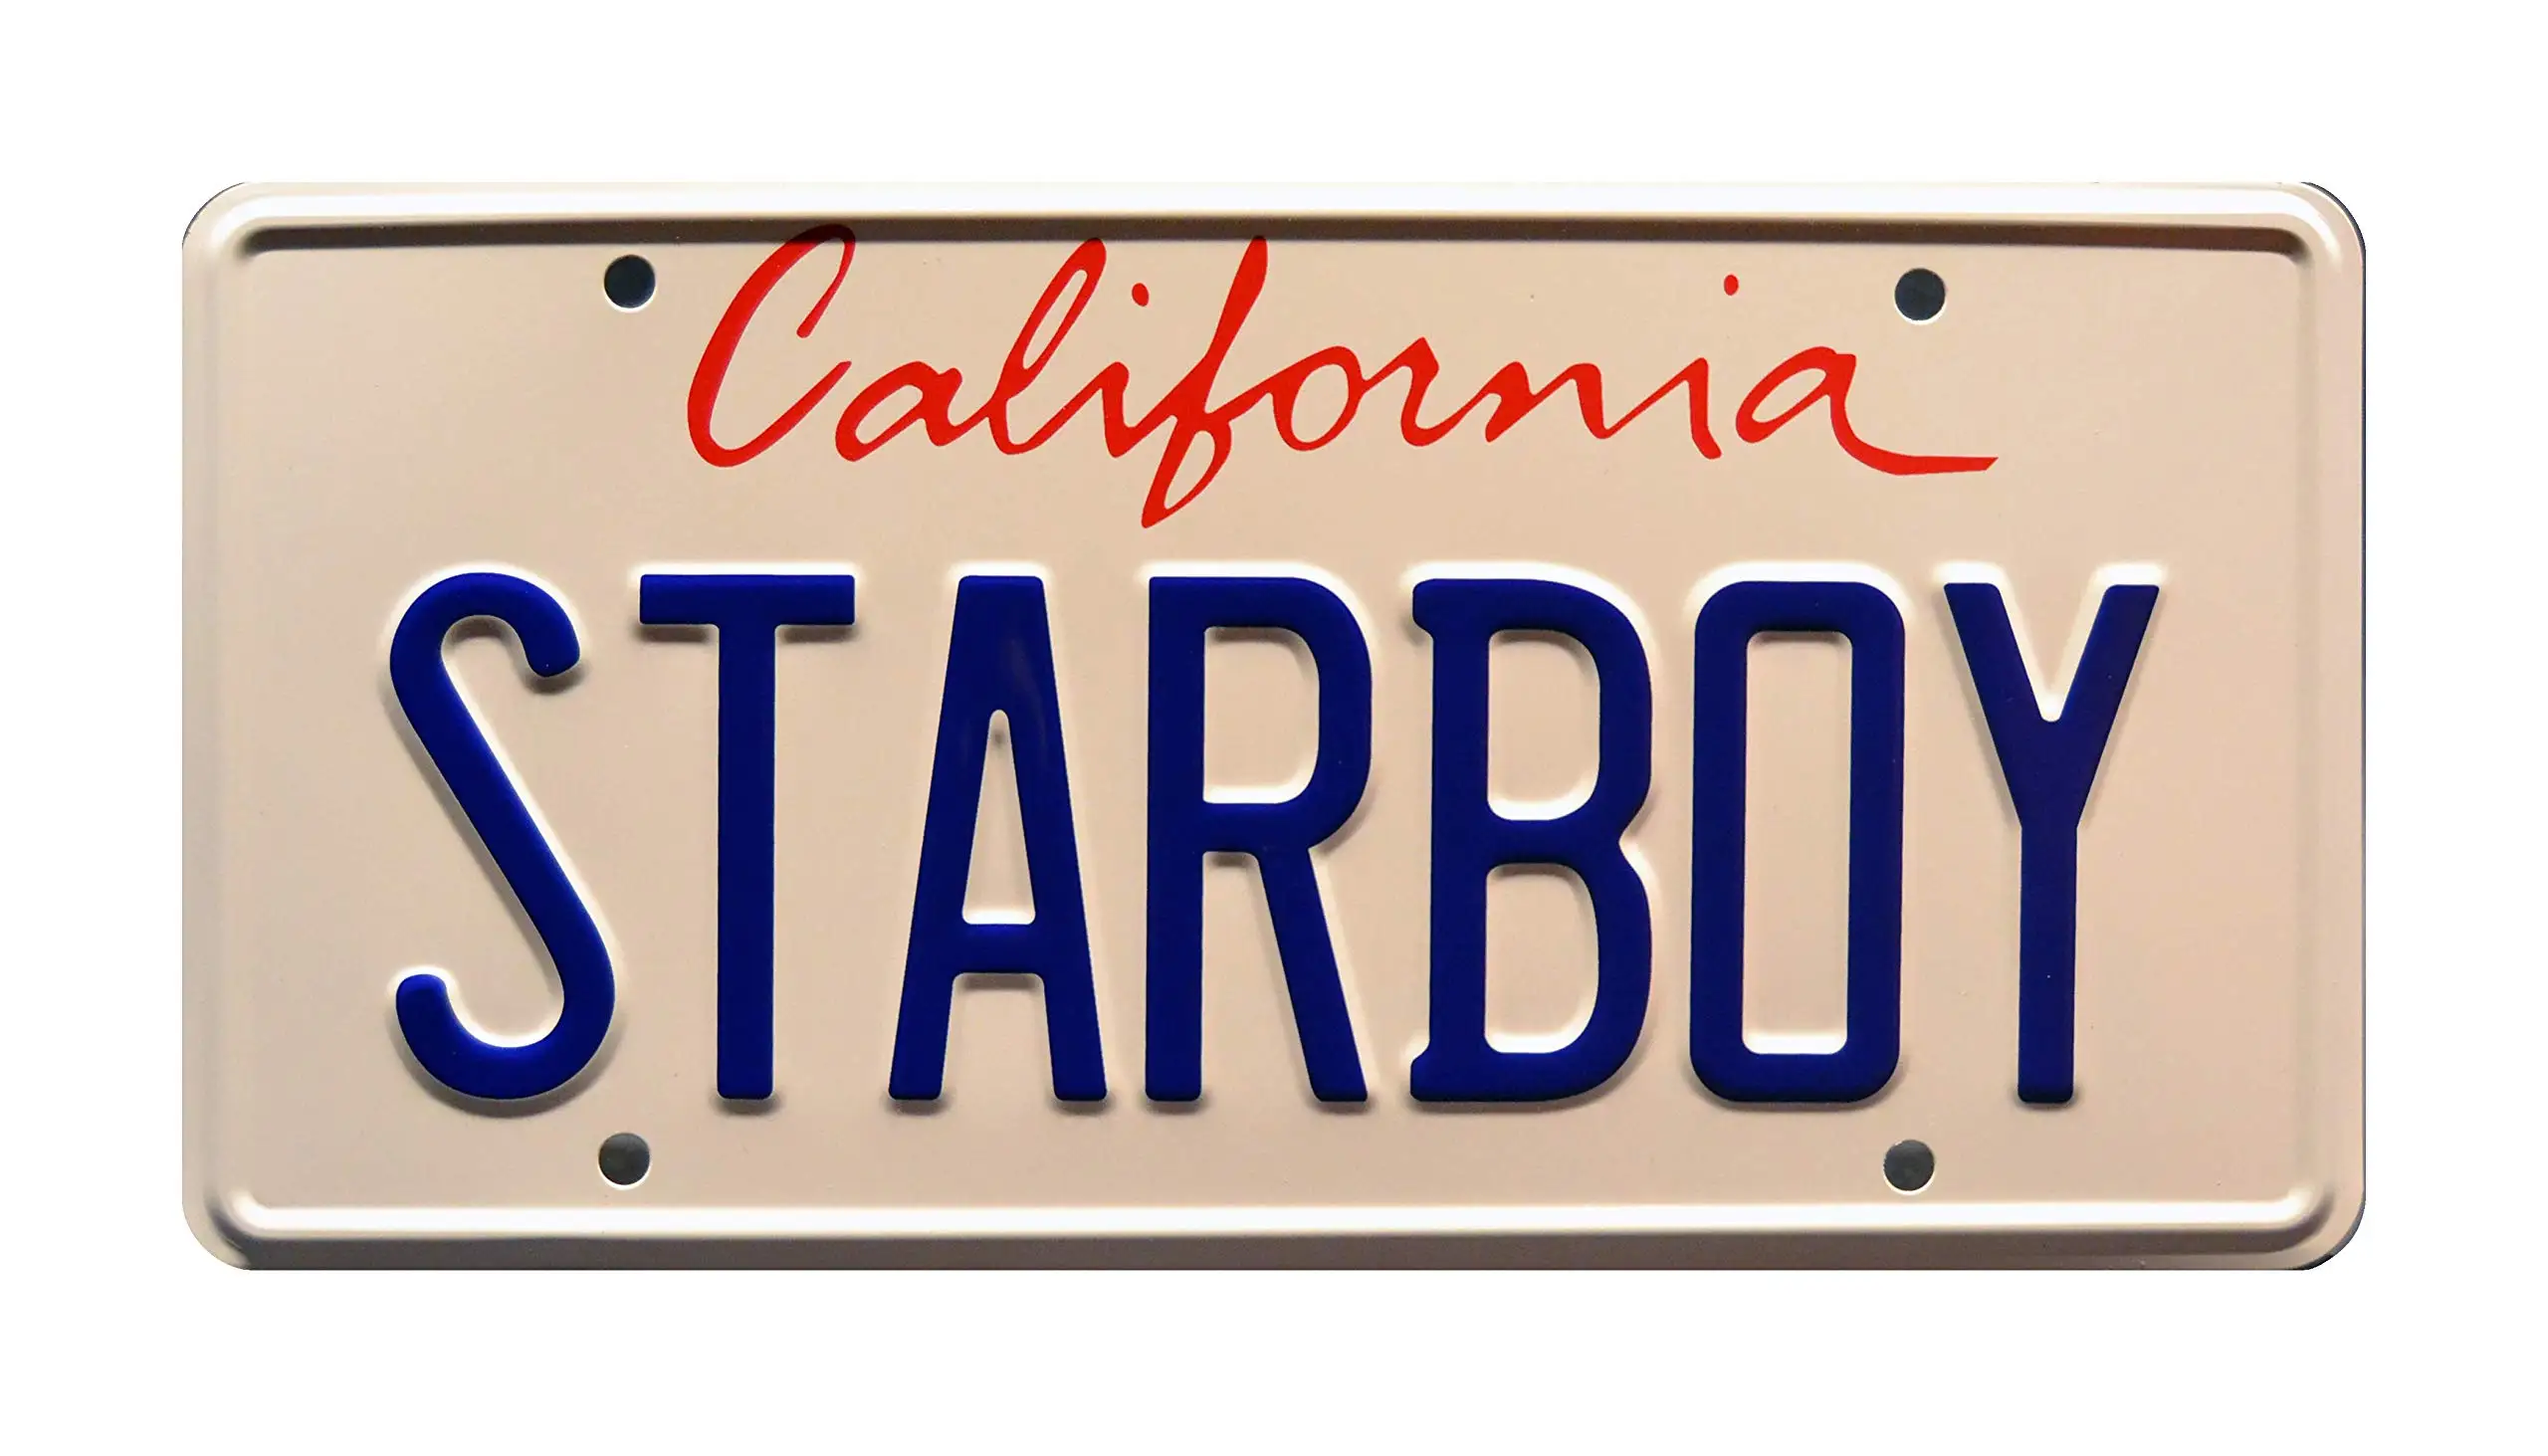 

Celebrity Machines The Weekend Ft Daft Punk | Starboy Metal Stamped License Plate License Plate Frames Car Front License Plate